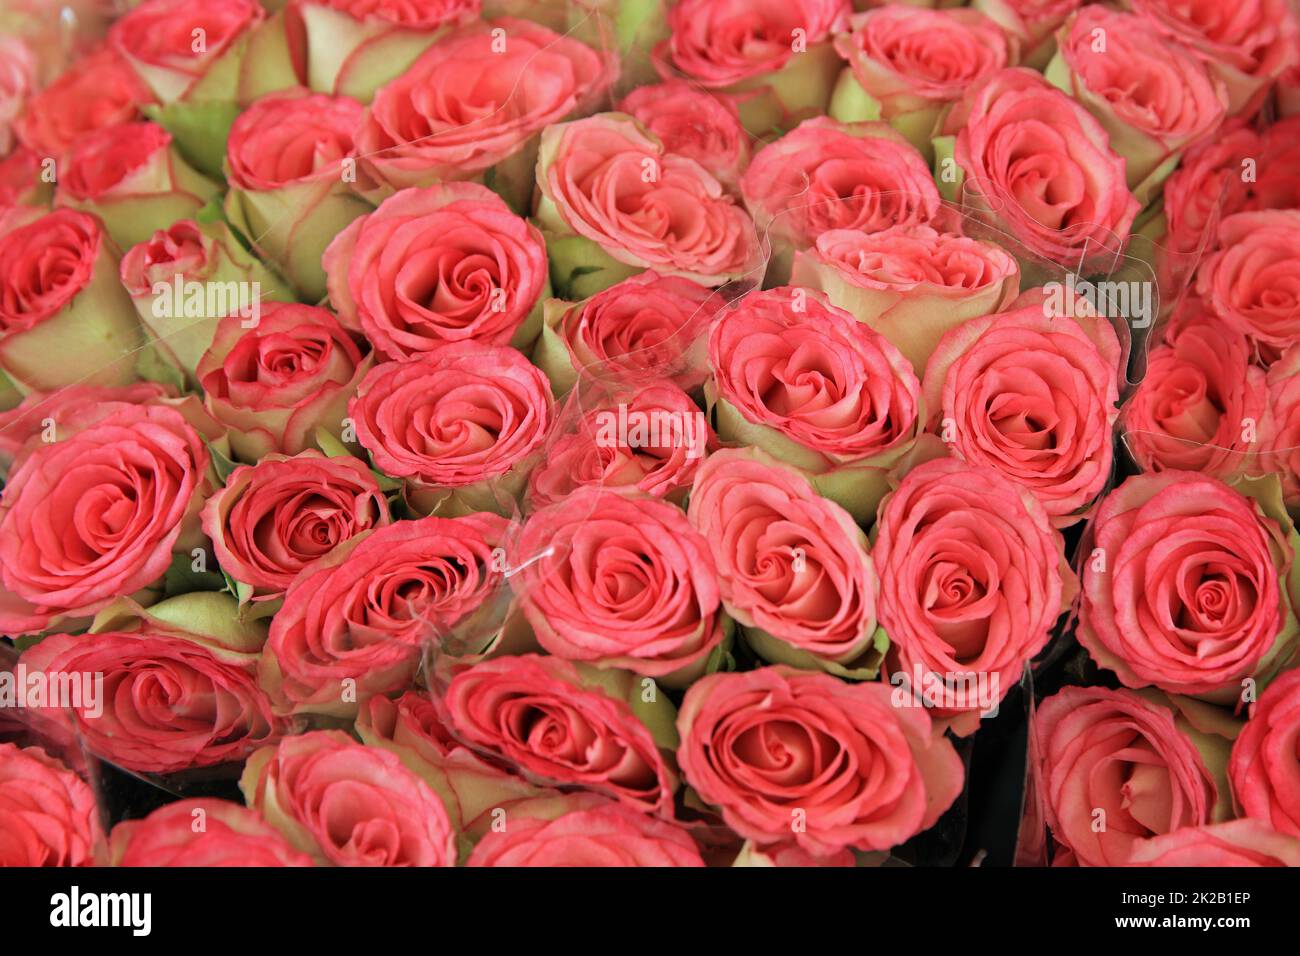 rose, pink, flower, bouquet, roses, flowers, love, nature, wedding,  isolated, white, bunch, gift, valentine, floral, beautiful, petal, beauty,  blossom, red, romance, anniversary, birthday, romantic, g Stock Photo